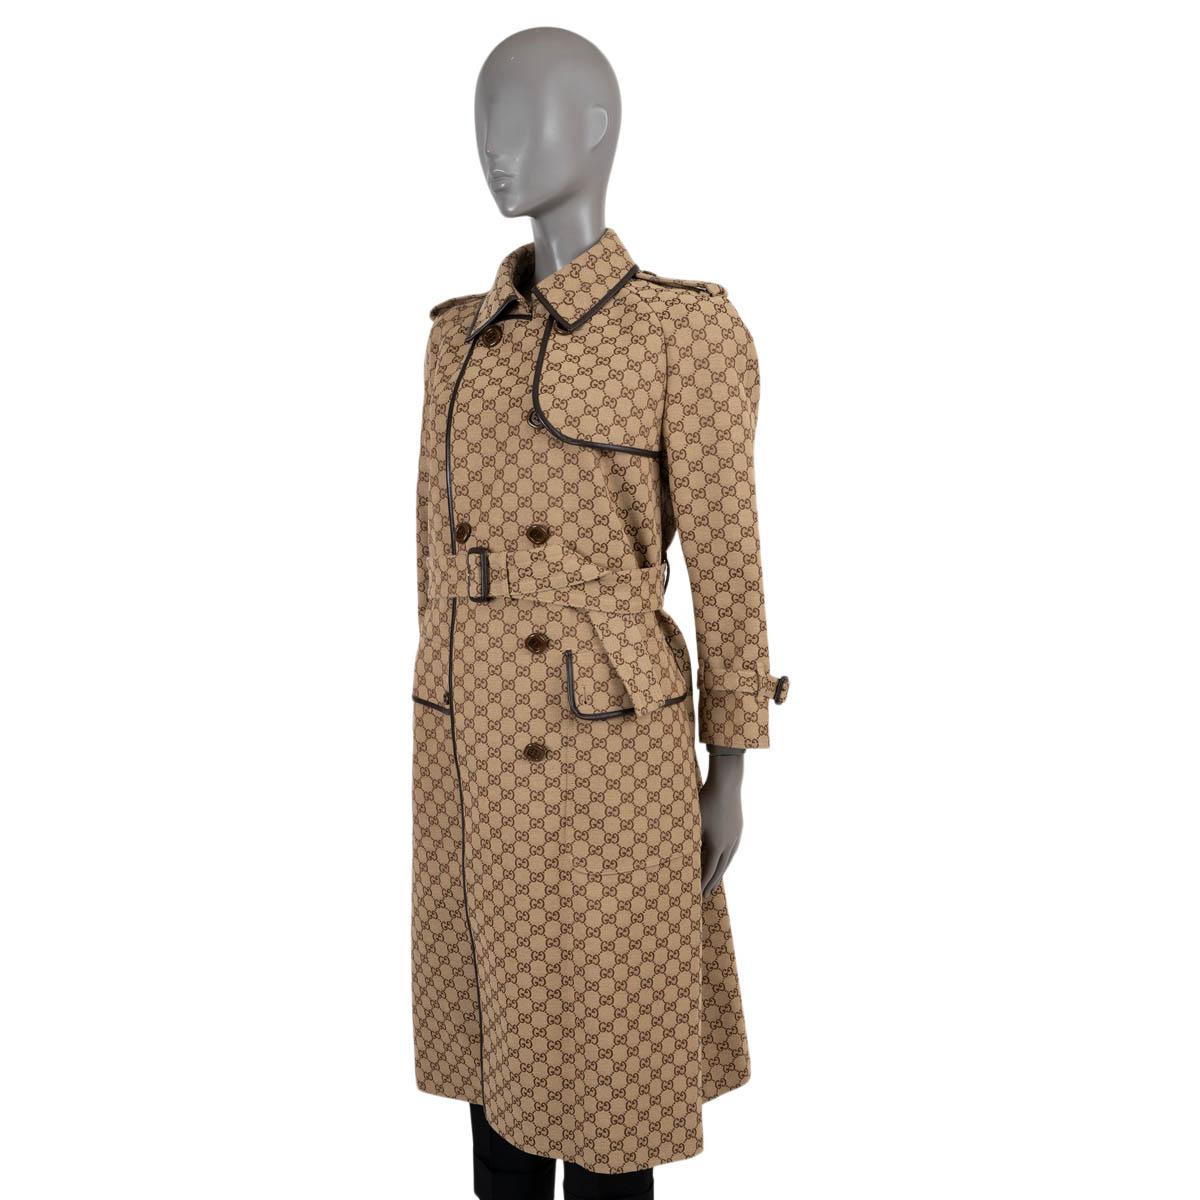 100% authentic Gucci trench coat in beige GG jacquard canvas cotton (71%) and polyester (29%). Features dark brown leather trims, spread collar, storm flap on the front and back, flap pockets, epaulettes, belted cuffs, belt loops and a matching belt